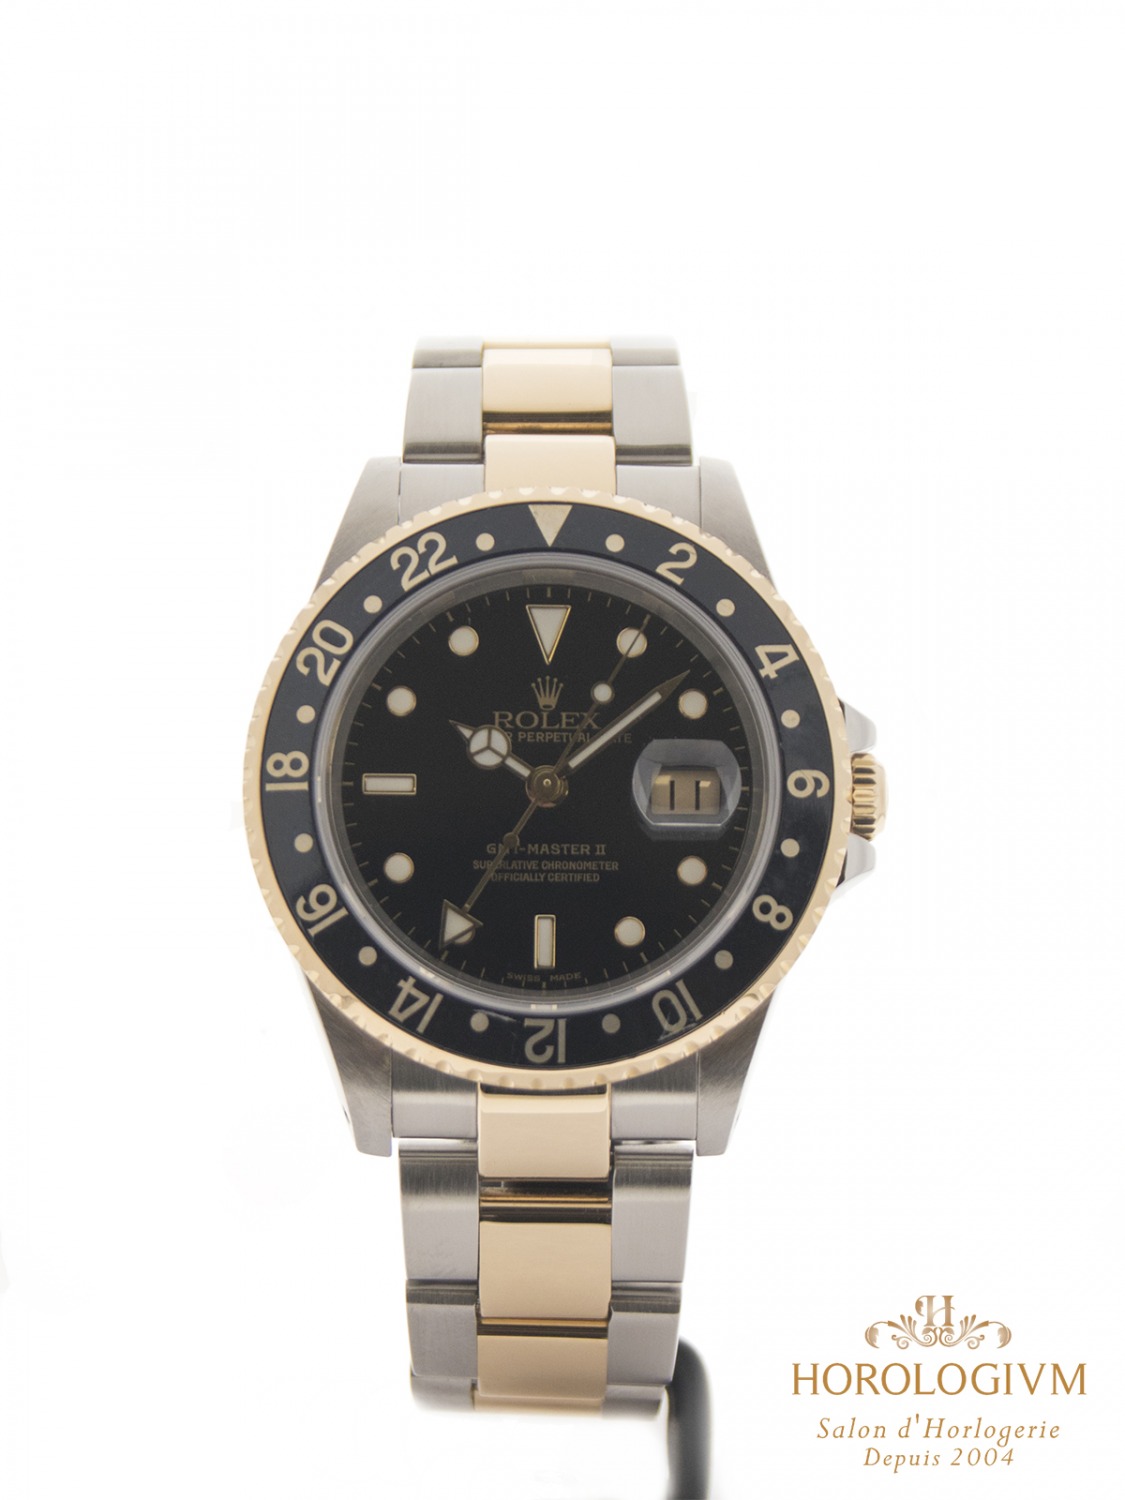 Rolex GMT - Master II STEEL & GOLD “K” Serial Ref. 16713 watch,  two-tone (bi-colored) silver (case) and yellow gold + black (bezel)